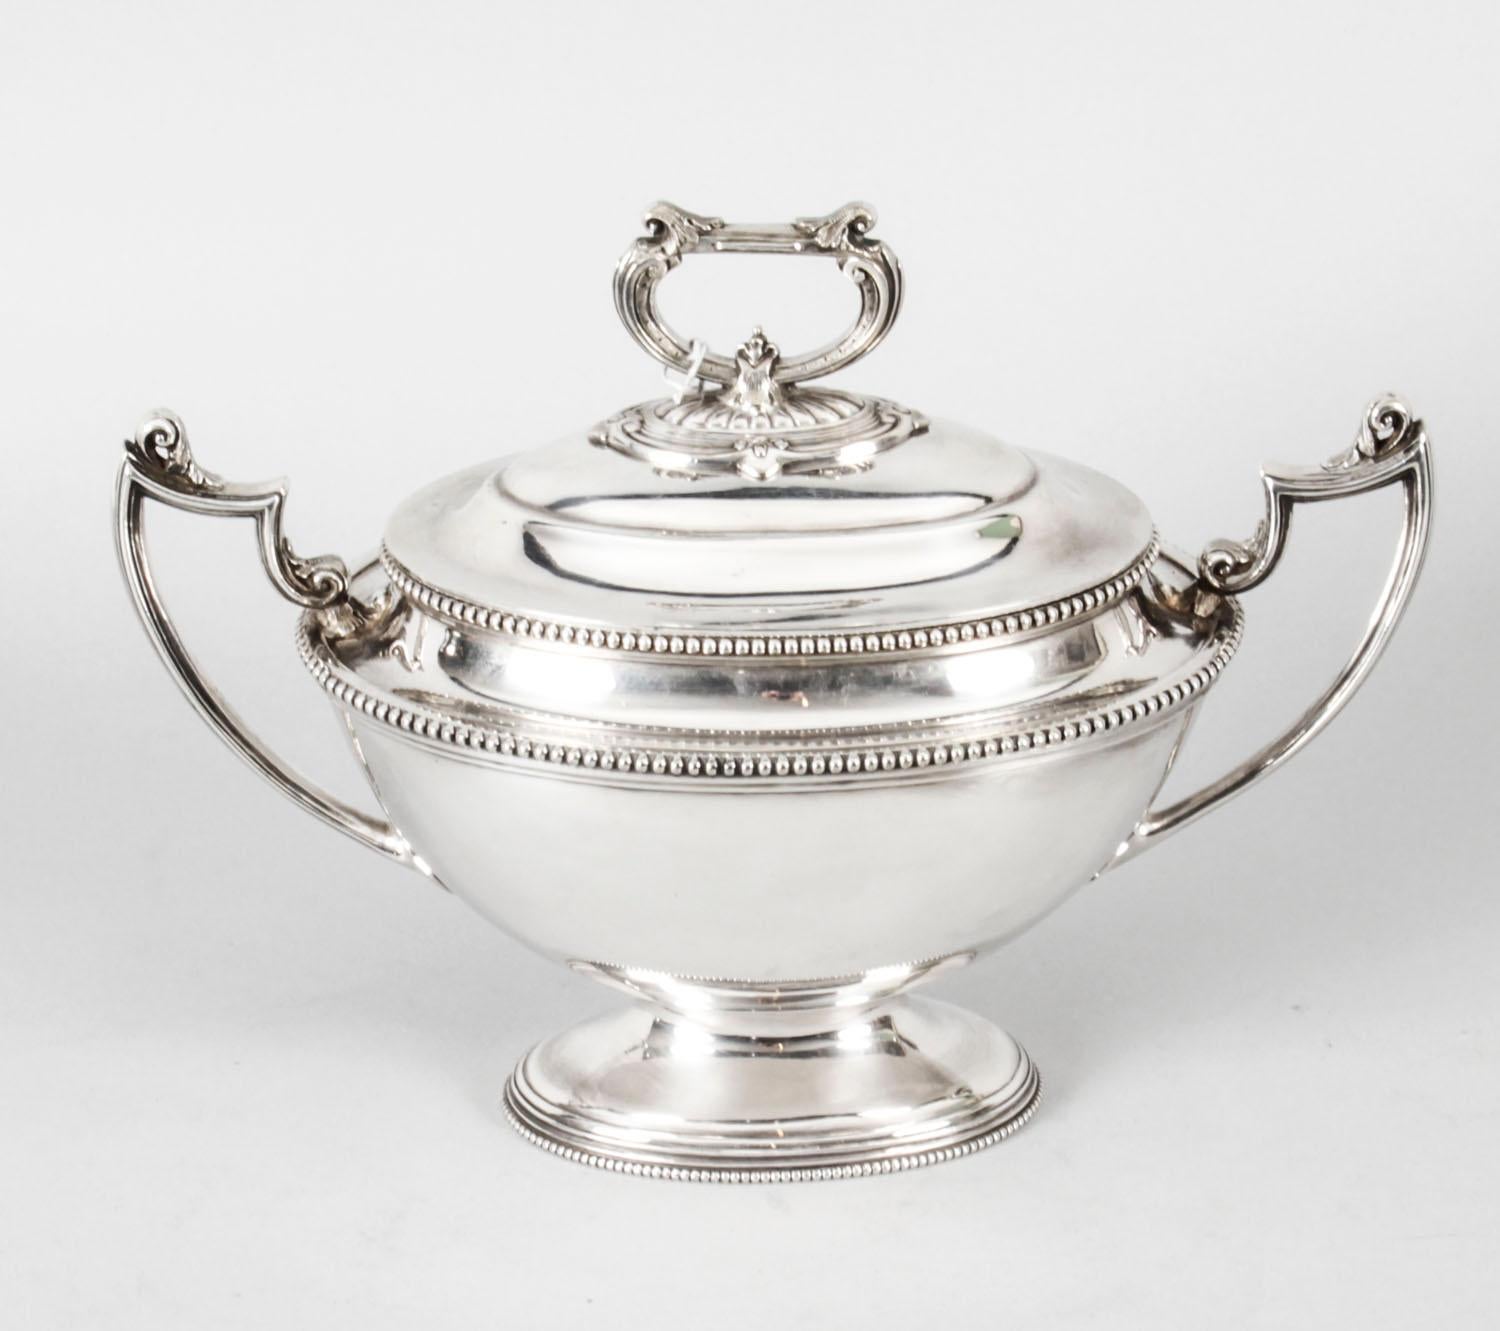 This is an exquisite and rare antique pair of English silver plated sauce tureens, circa 1860 in date.
 
These lovely sauce tureens are of the highest quality and bear the makers' mark of the renowned silversmith Henry Atkins.
 
They are of oval